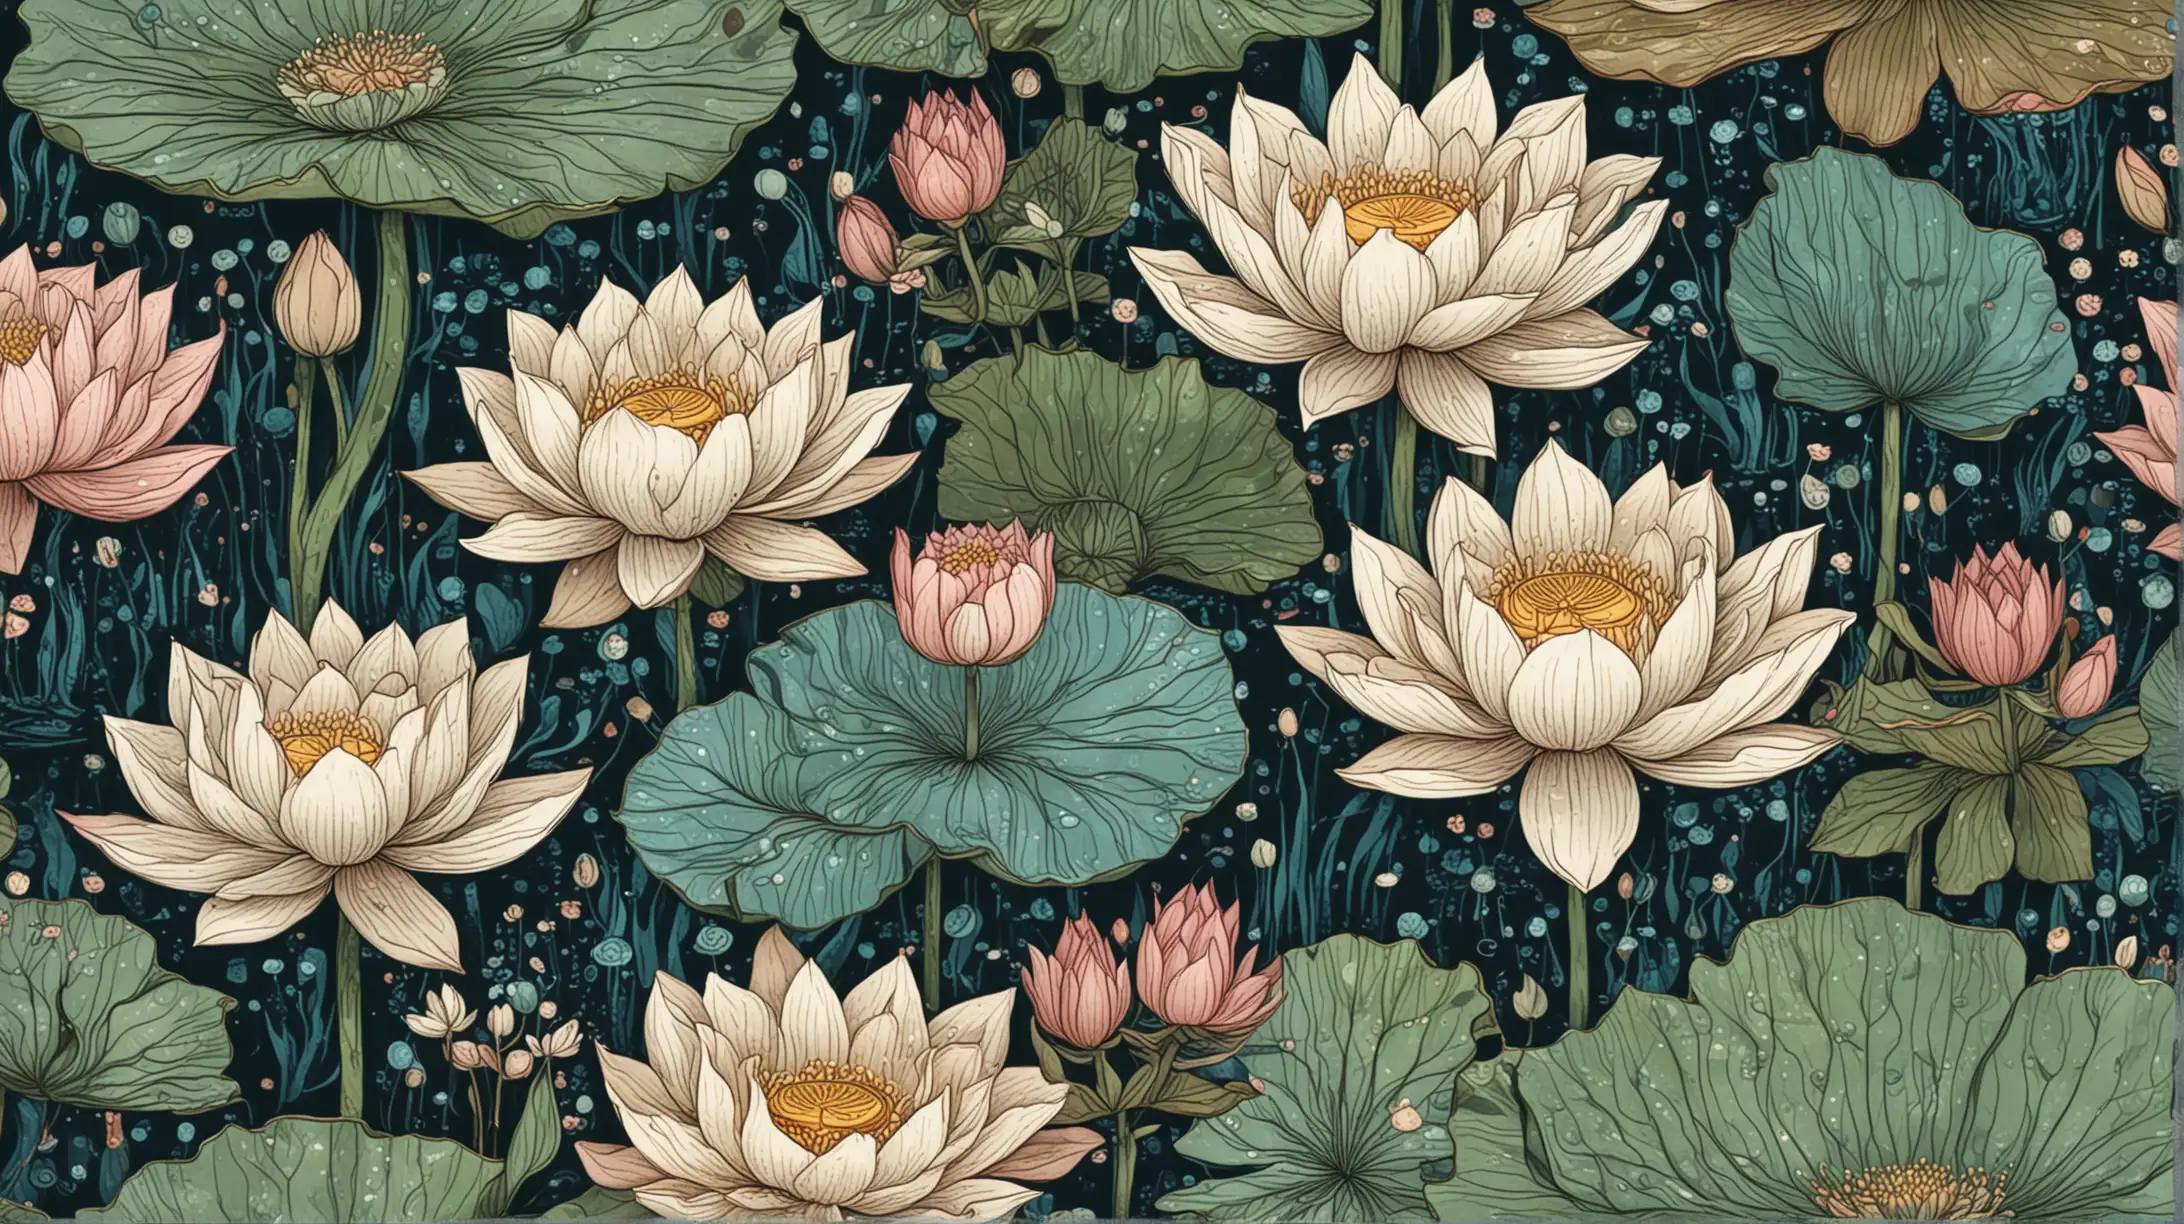 Whimsical Pattern with Stylized Lotus Flowers and Water Lilies